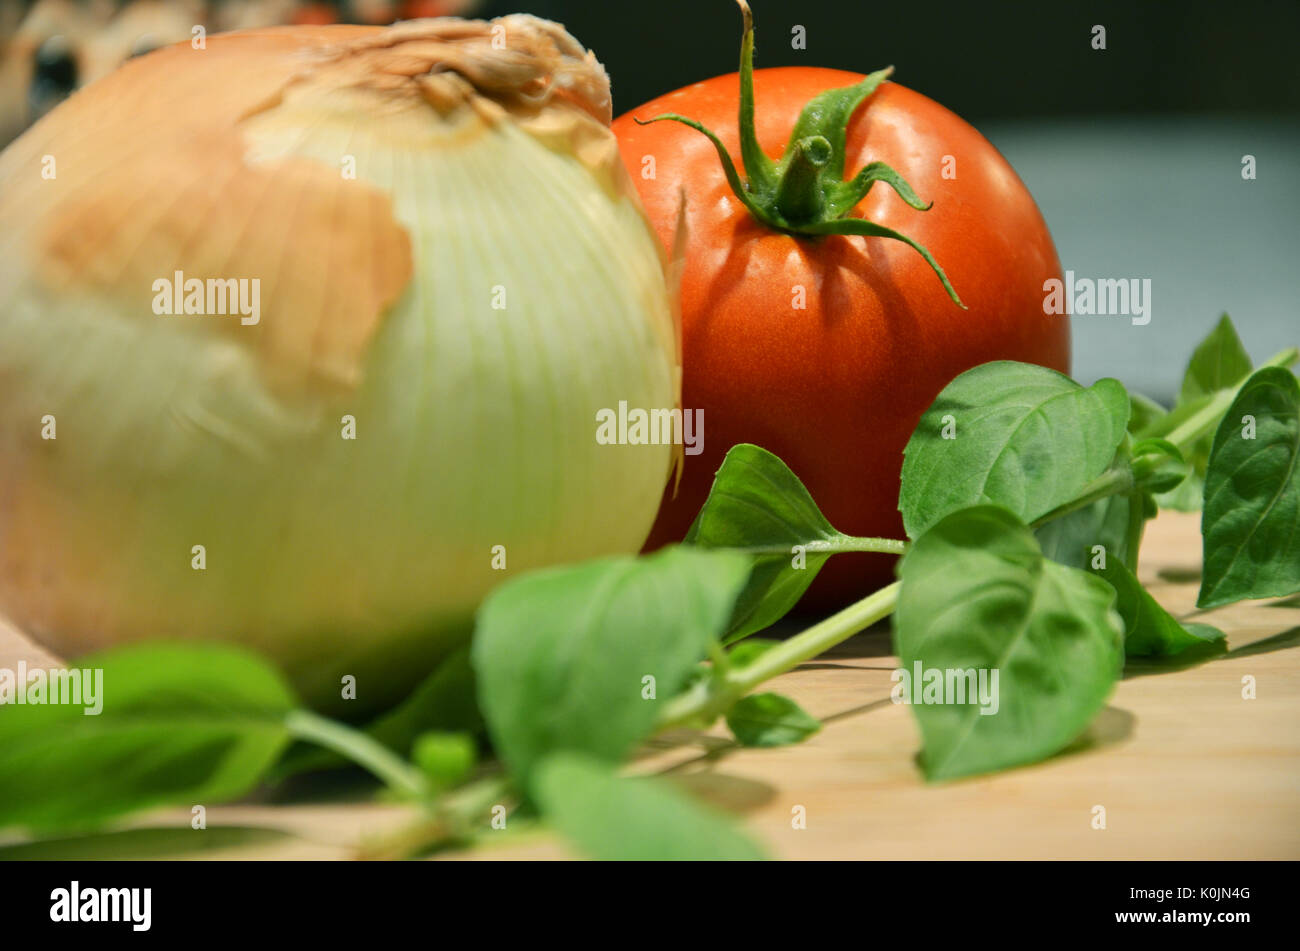 A yellow onion, tomato, and stem of basil on a cutting board in a kitchen as ingredients ready to be cut to make a pasta sauce. Stock Photo